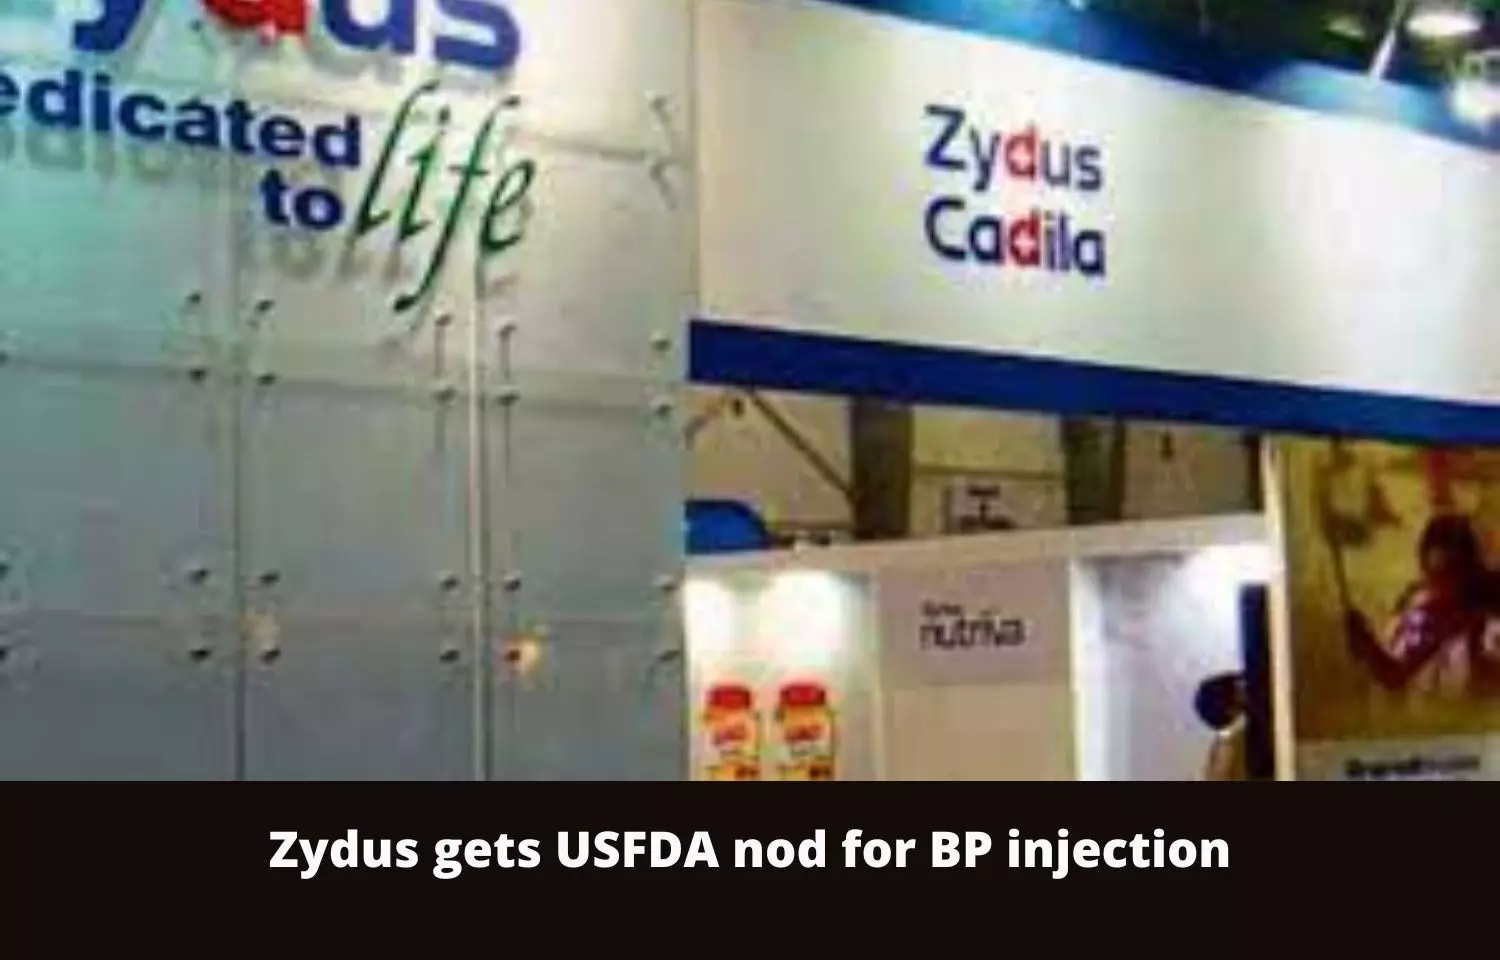 Zydus gets USFDA nod for blood pressure injection